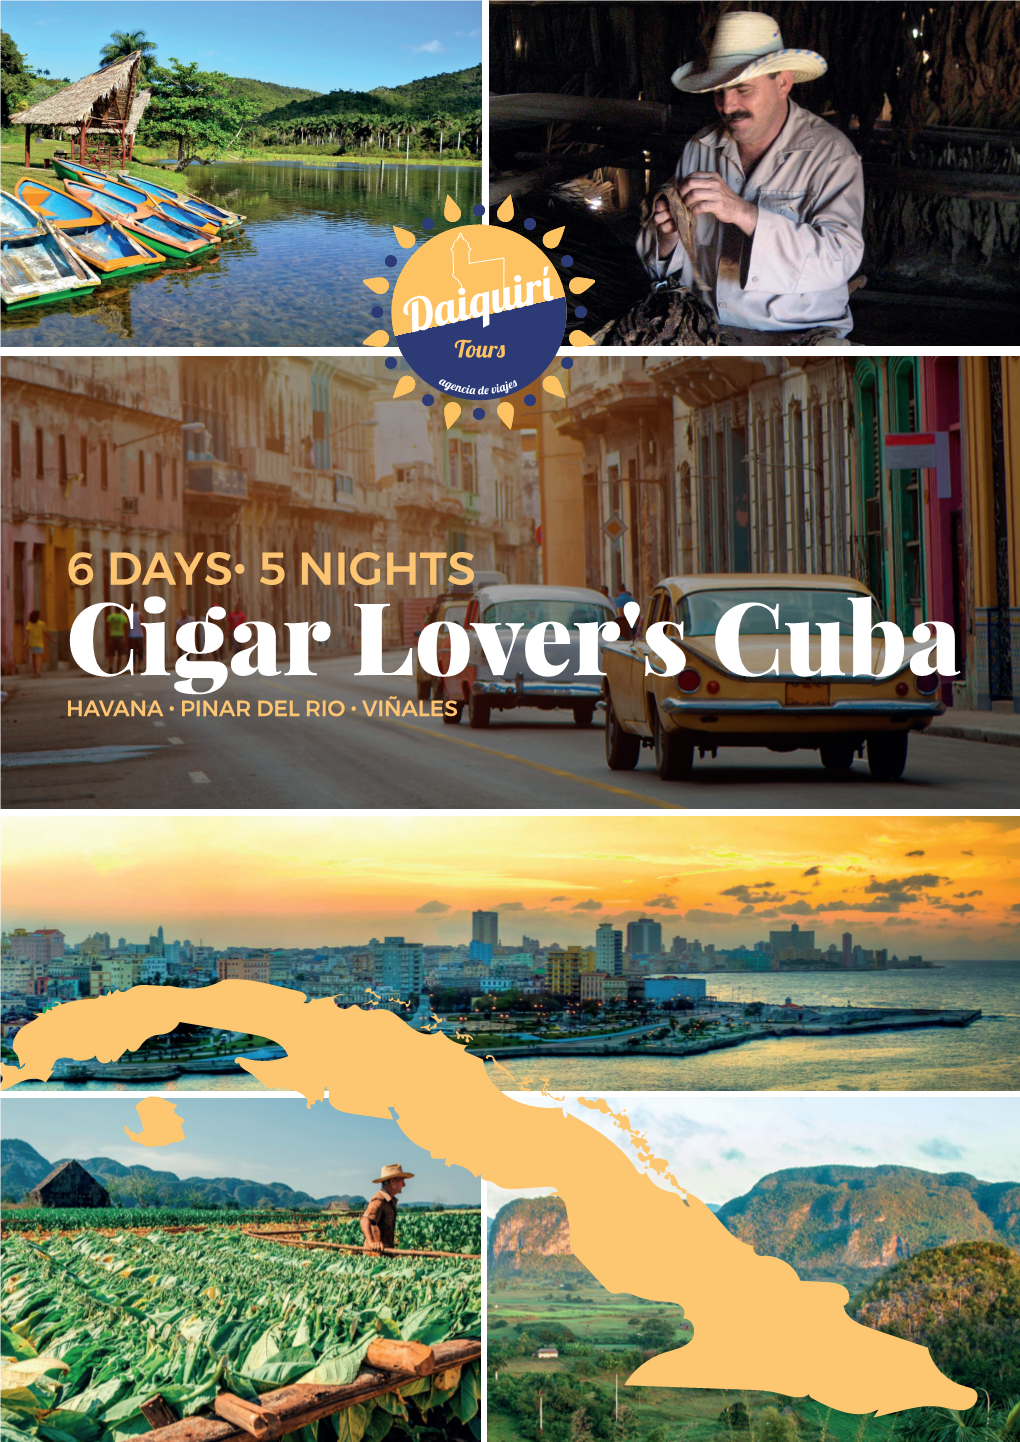 Cigar Lover's Cuba HAVANA � PINAR DEL RIO � VIÑALES Cuba Has a Rich History and Culture and Is Known for Being an Artistic and Welcoming Destination